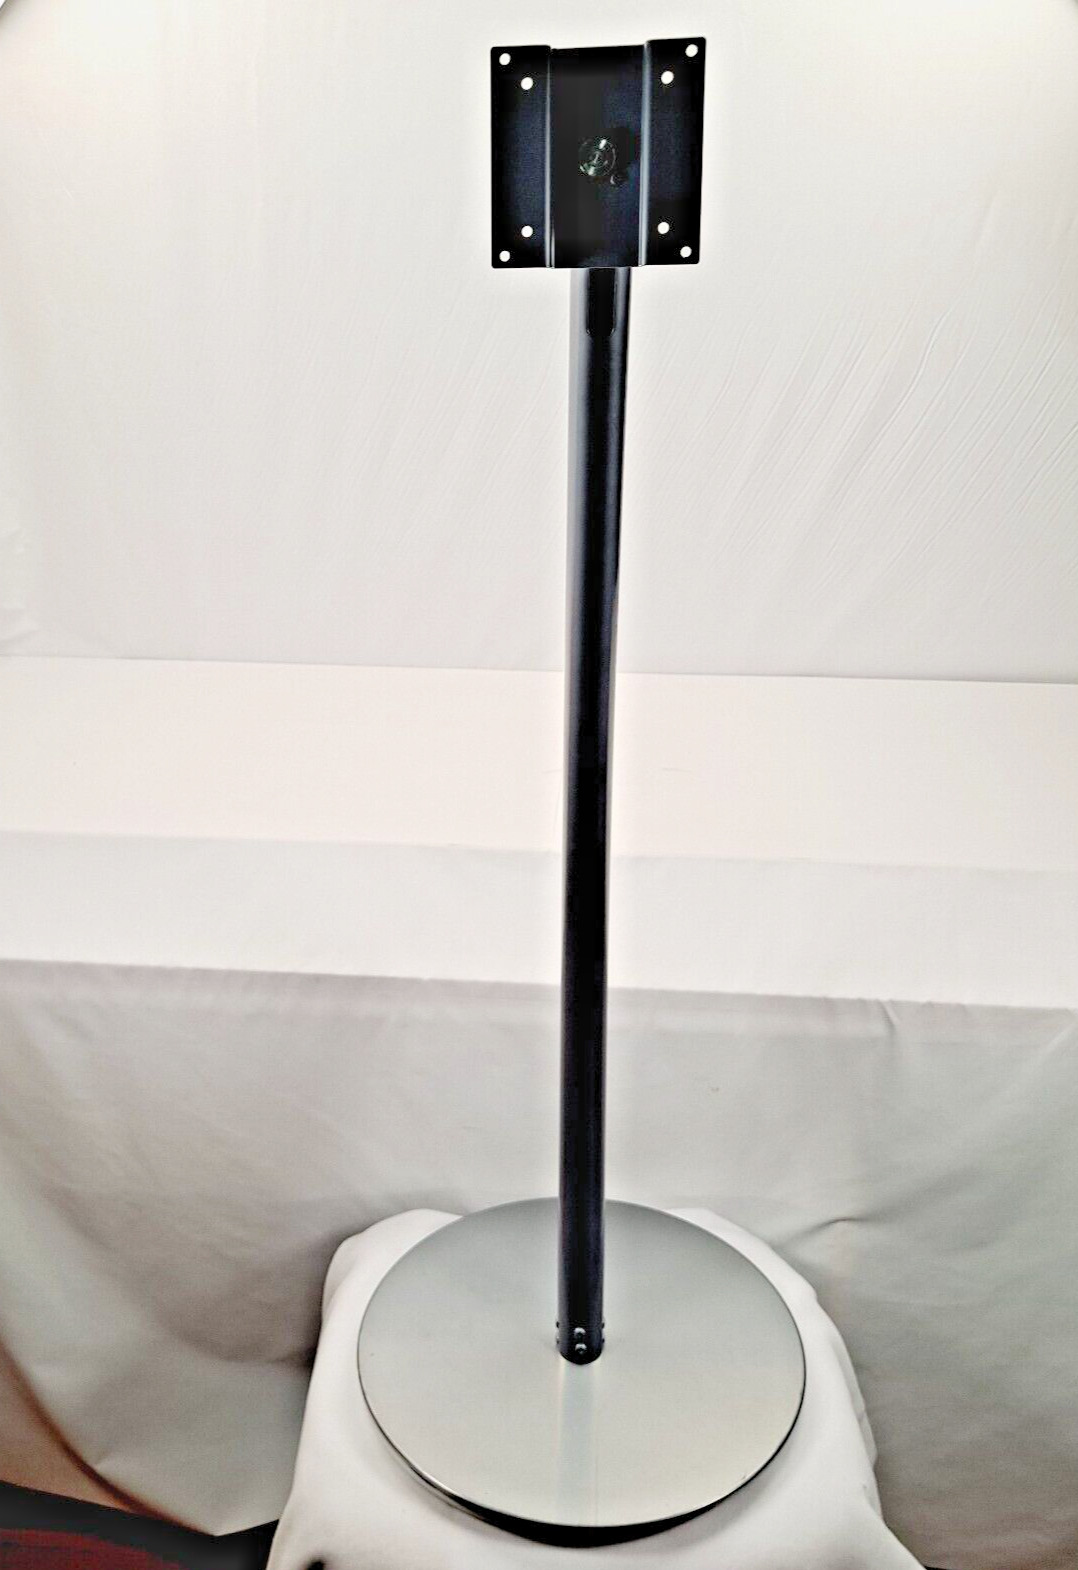 TRADE SHOW POINT OF SALE Tablet Floor Stand iPad Holder Mount ADJUSTABLE